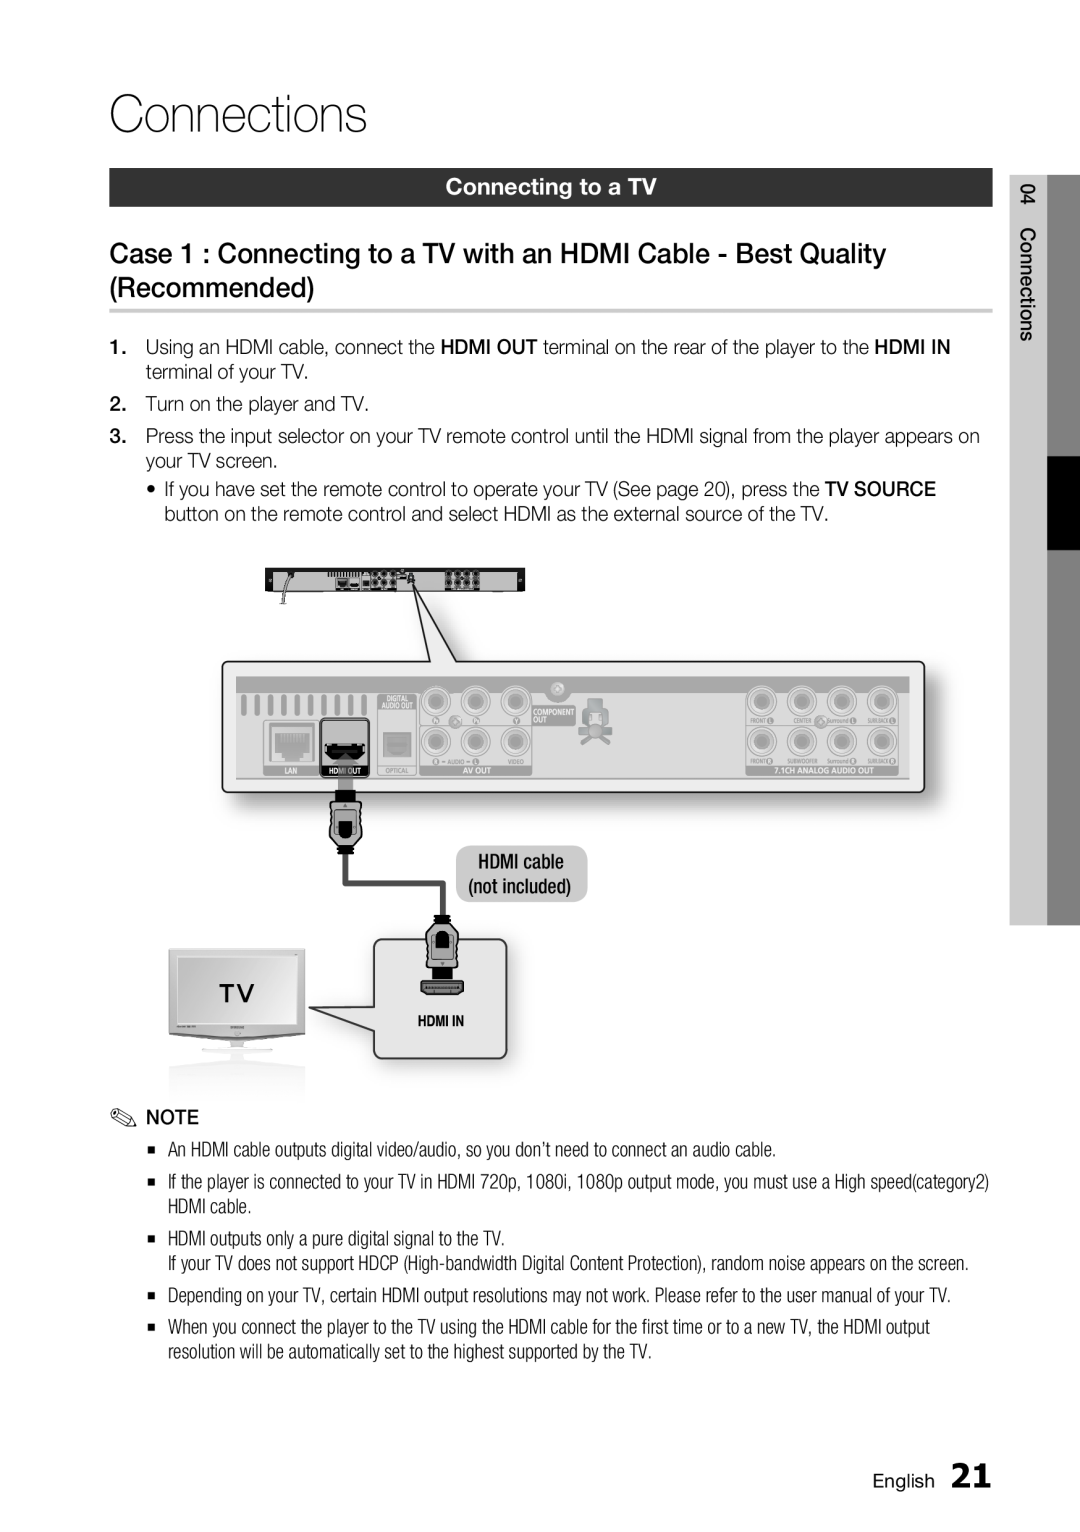 Samsung BD-C6500/XAA, BD-C6500/EDC, BD-C6500/XEF, BD-C6500/XEE manual Connections, Connecting to a TV 